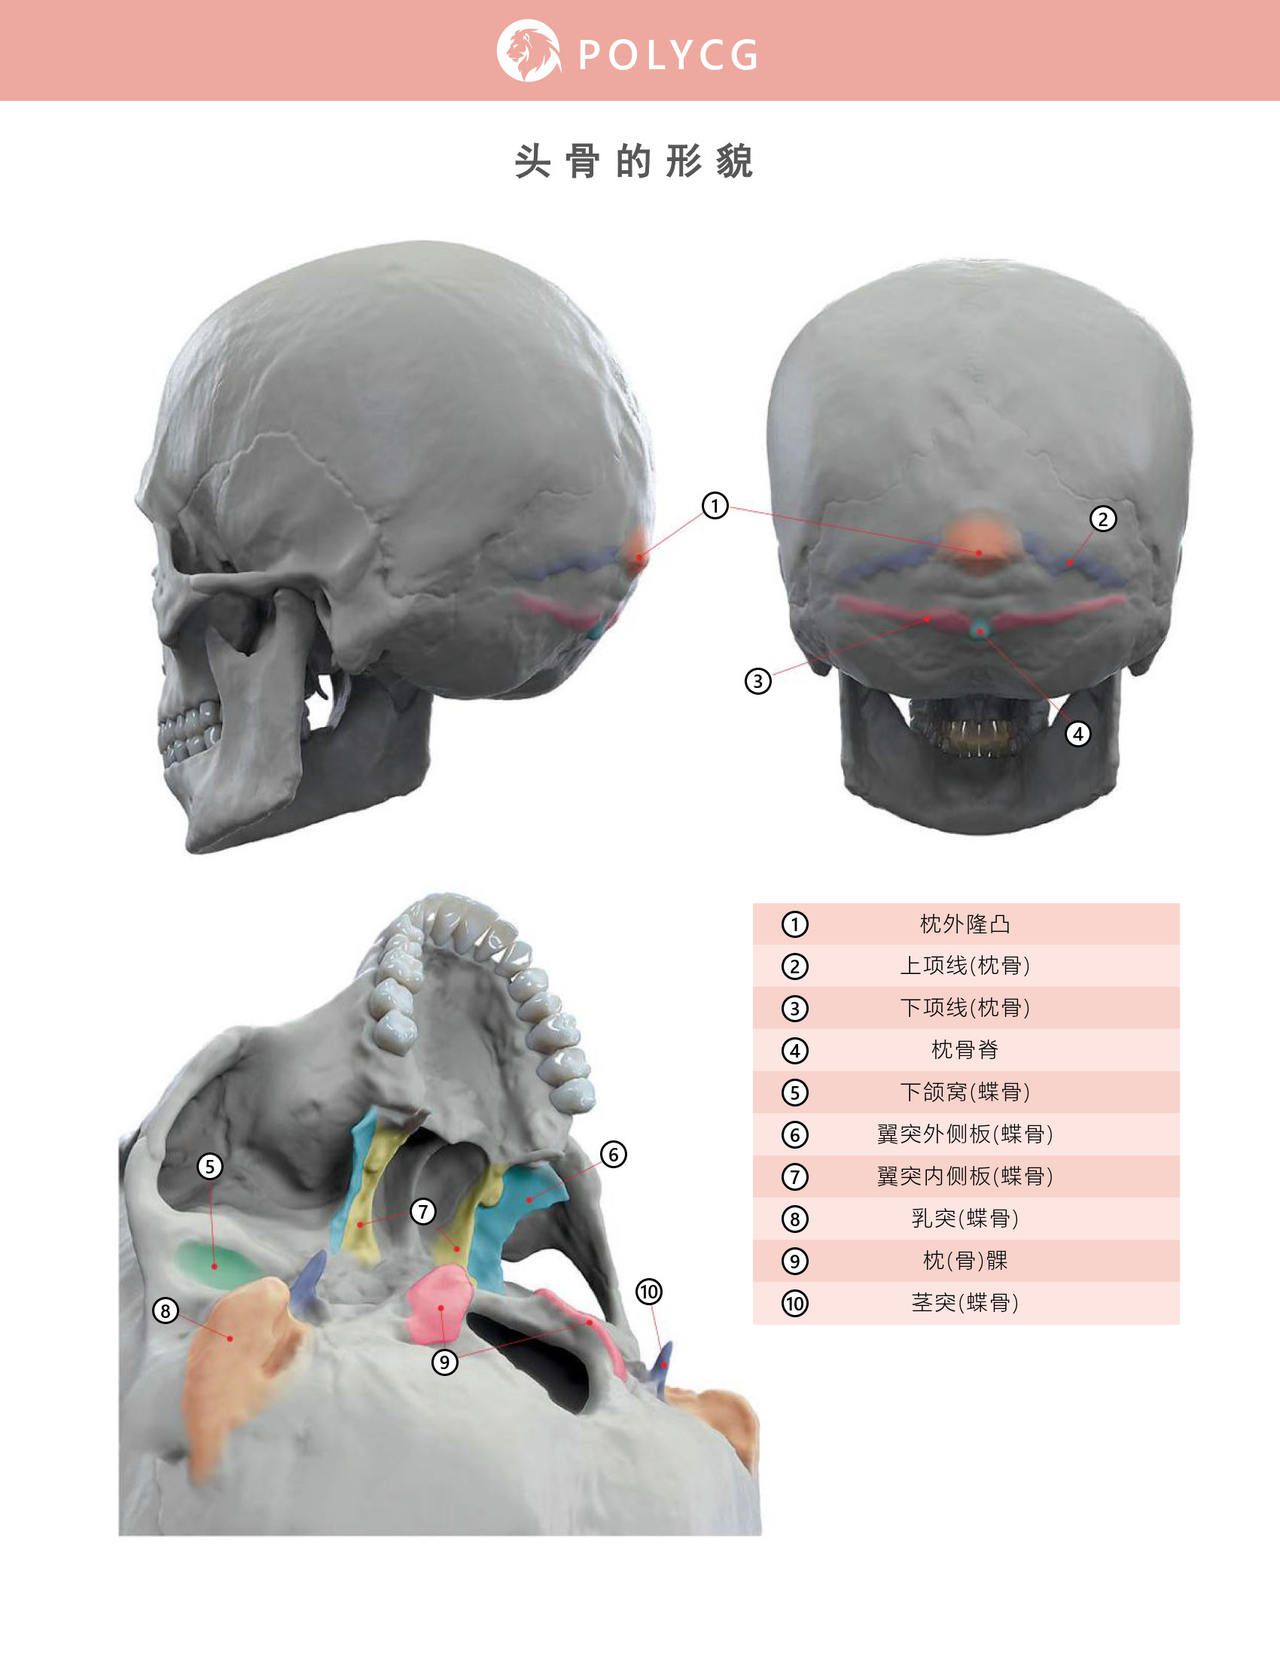 Uldis Zarins-Anatomy of Facial Expression-Exonicus [Chinese] 面部表情艺用解剖 [中文版] 17